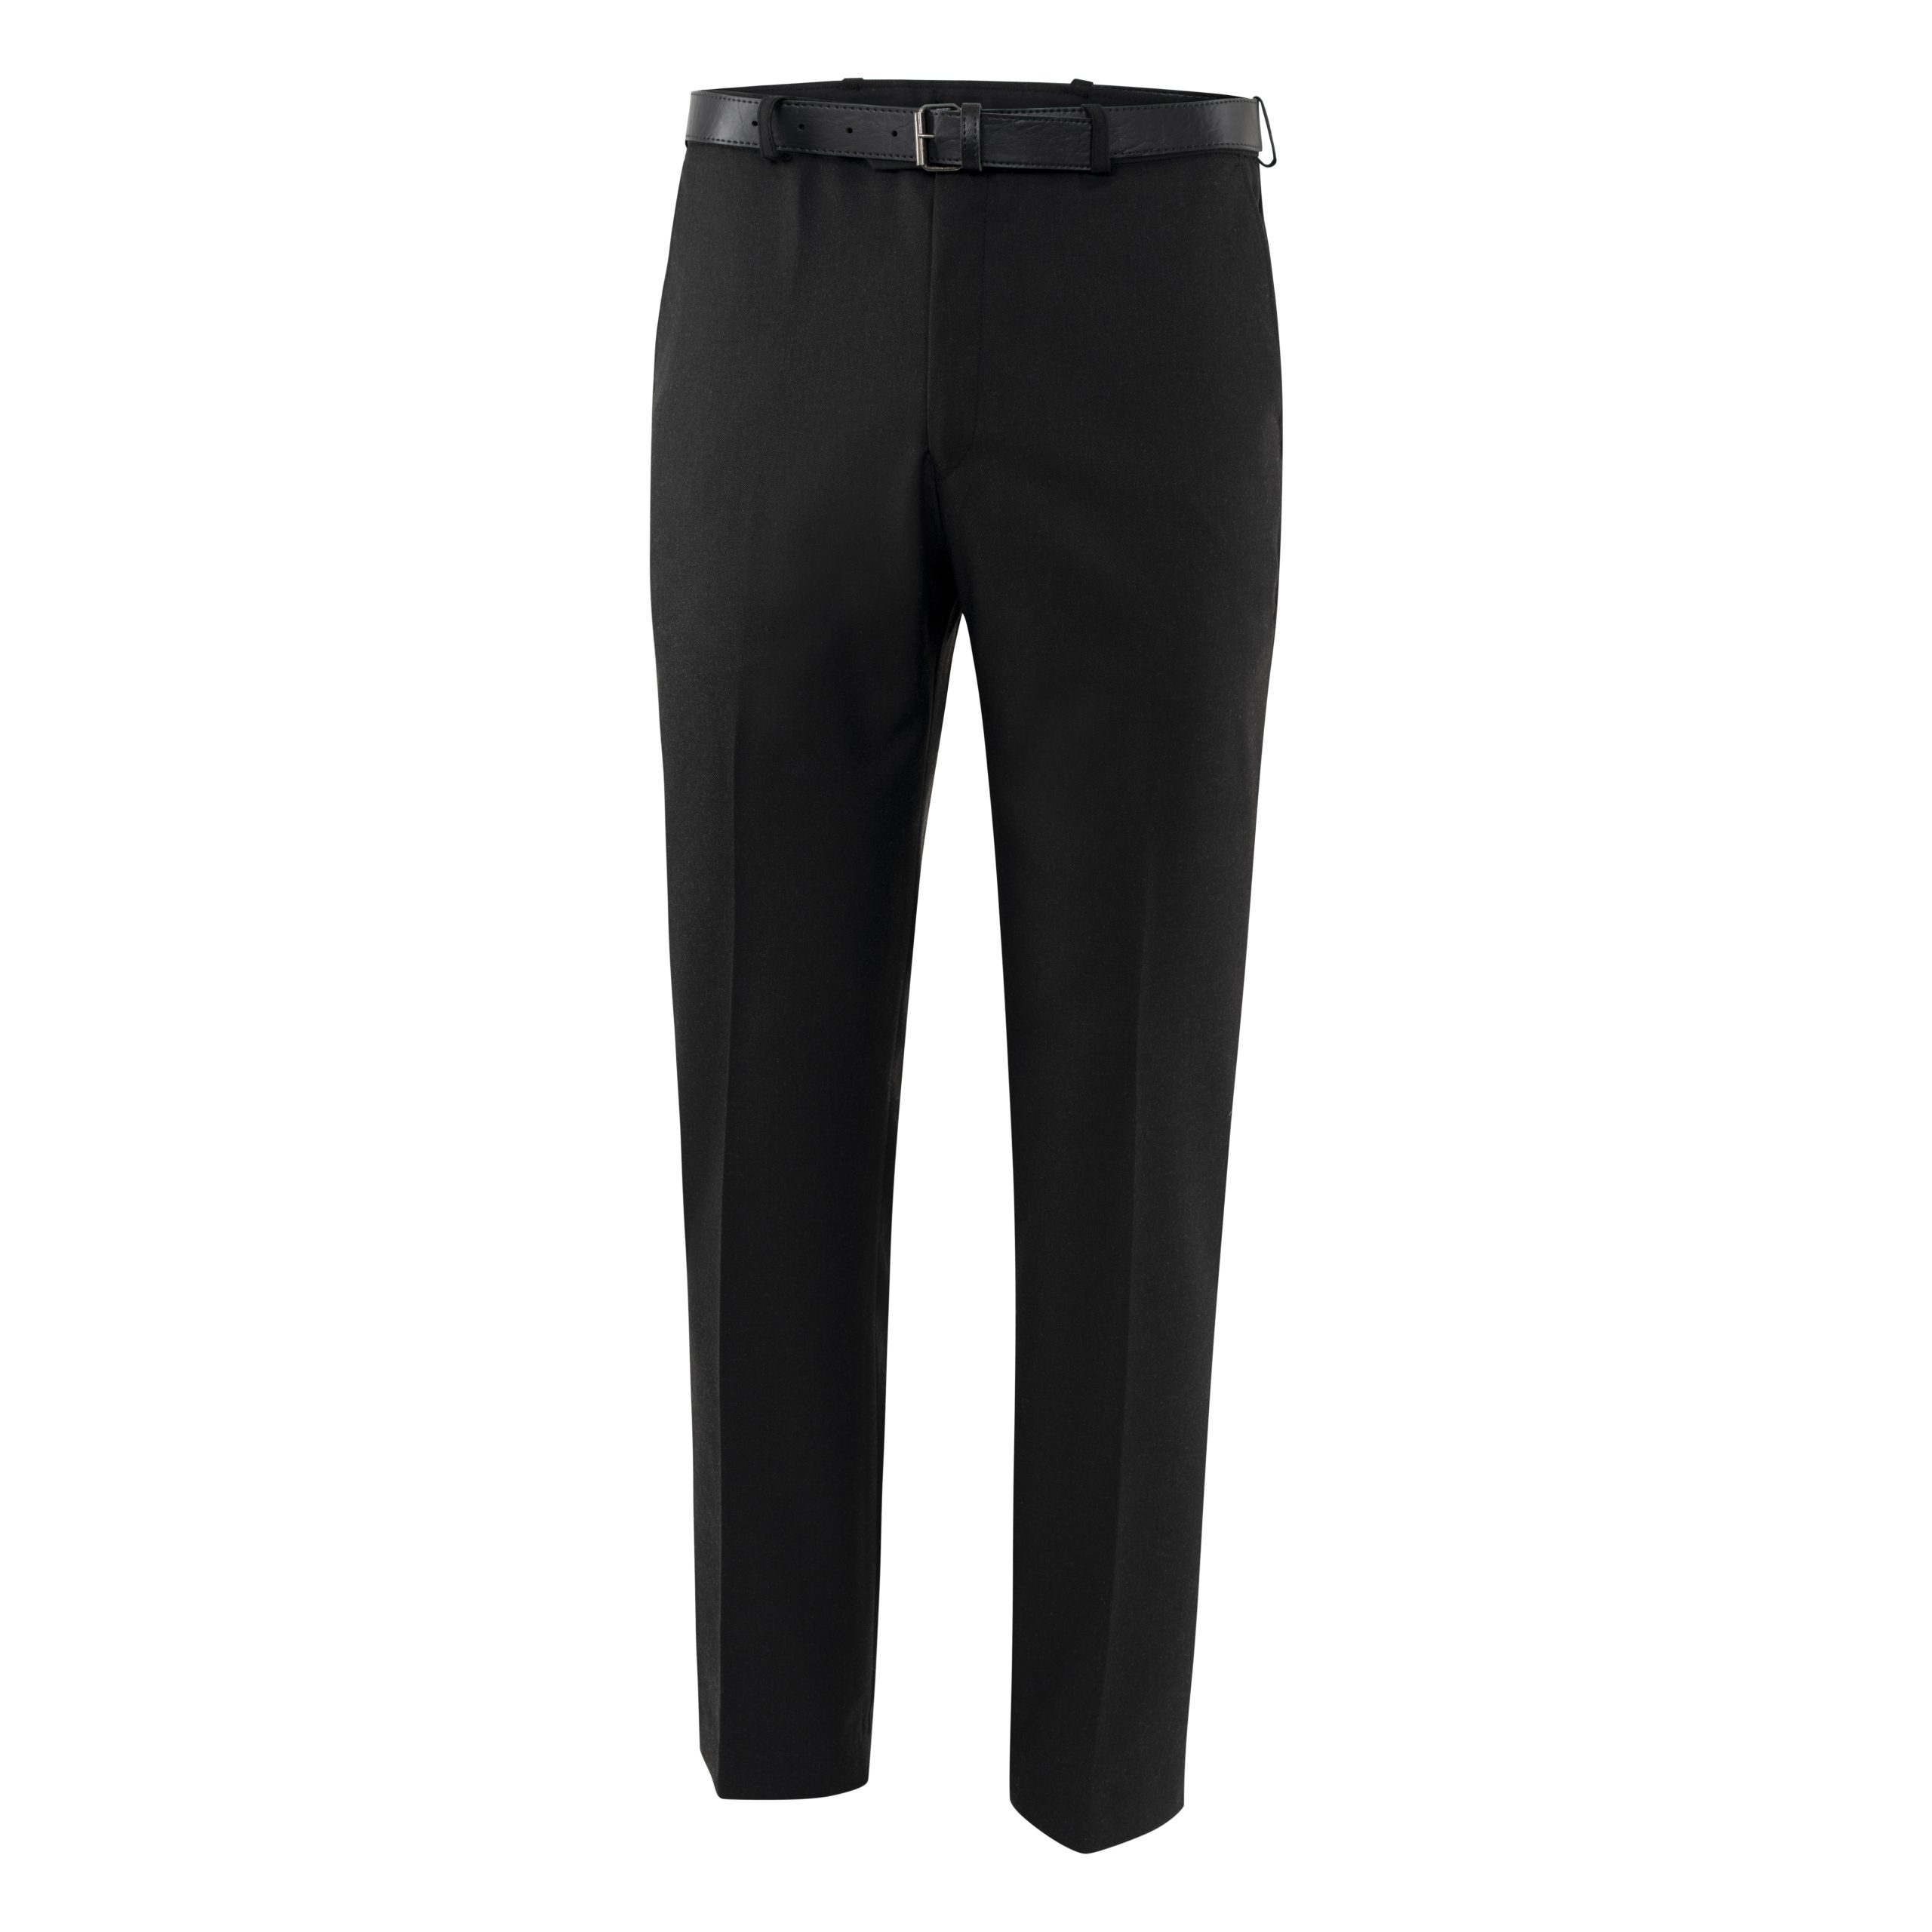 Southgate Boys Trousers | Smiths Schoolwear